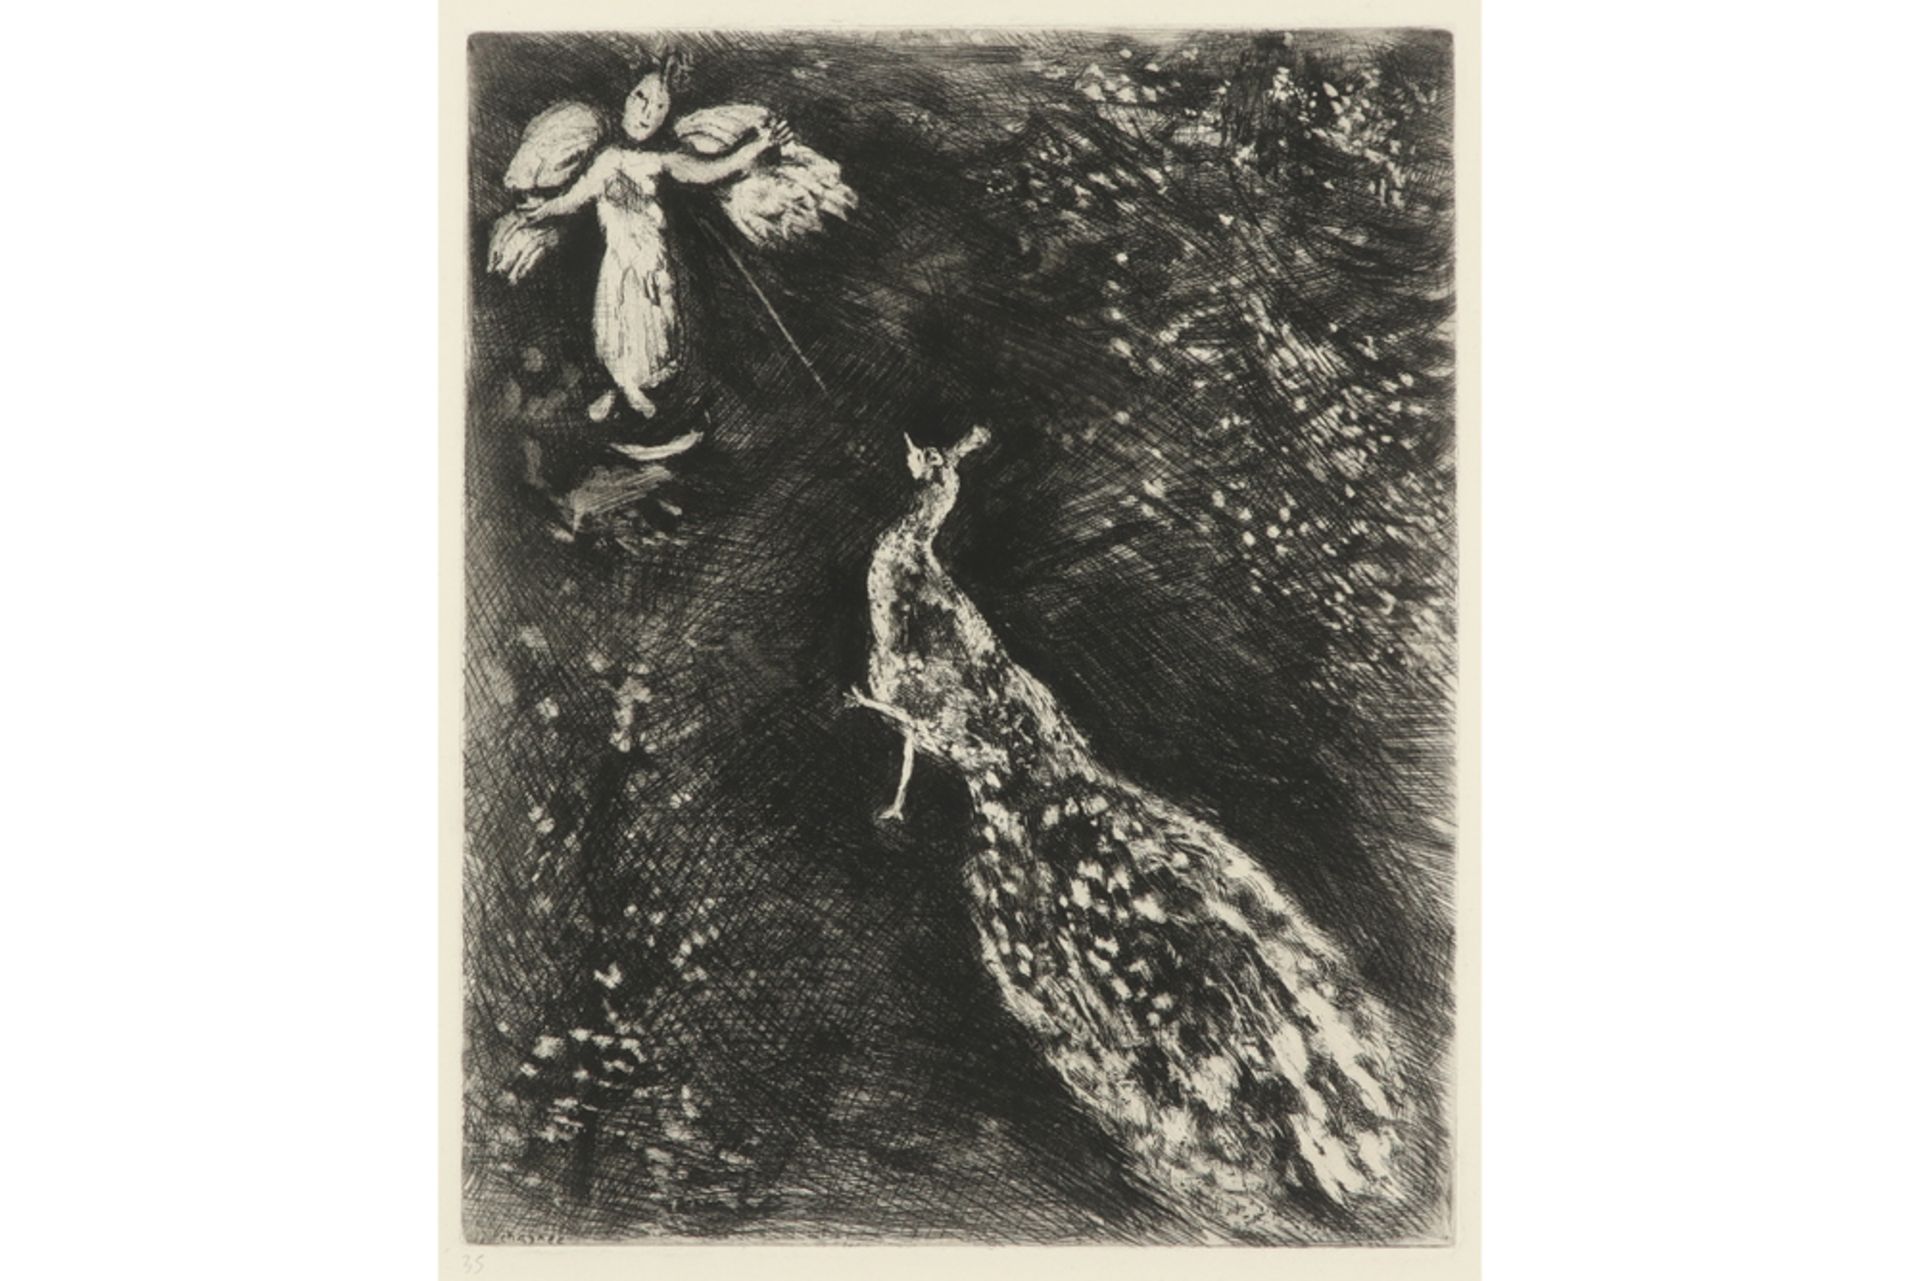 rare Marc Chagall etching (n°35 of 200) from the suite "Fables de Jean de la Fontaine" dd 1952 -